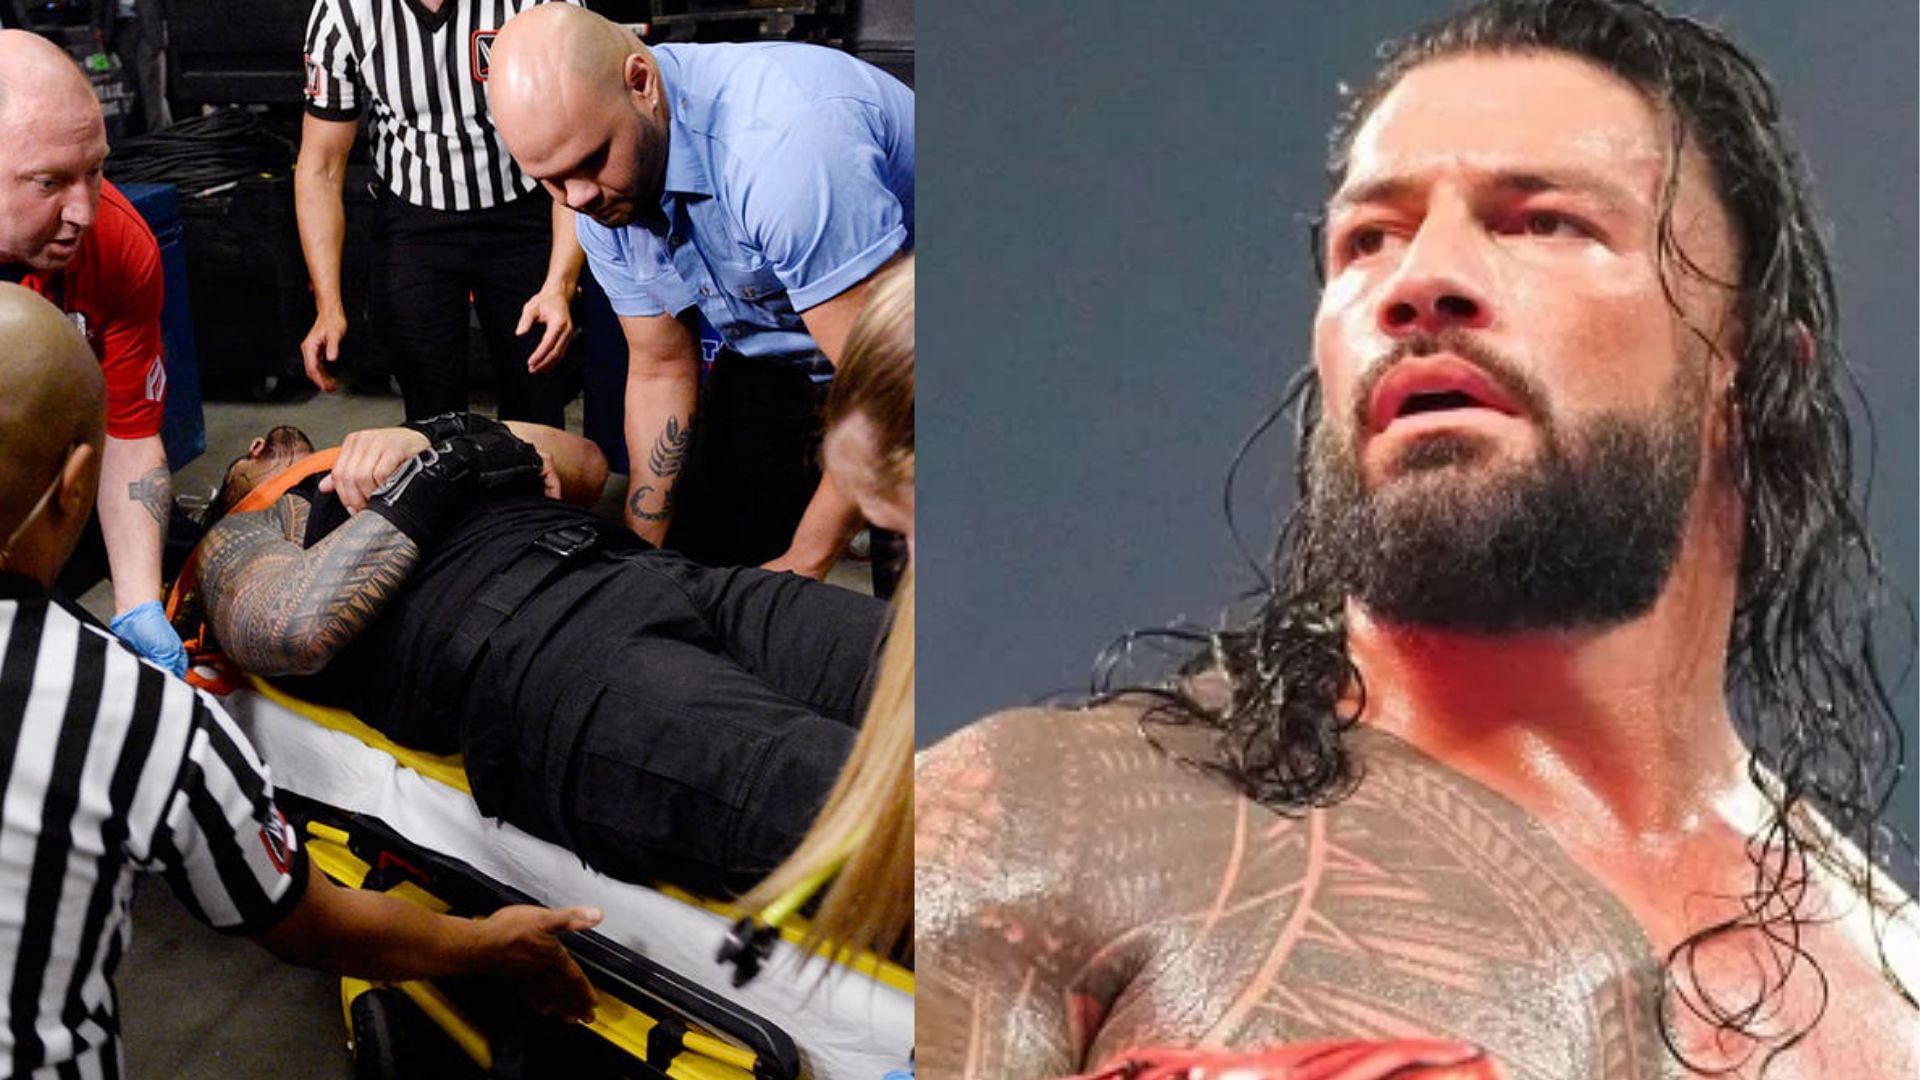 Roman Reigns is in trouble if WWE decides to push the giant